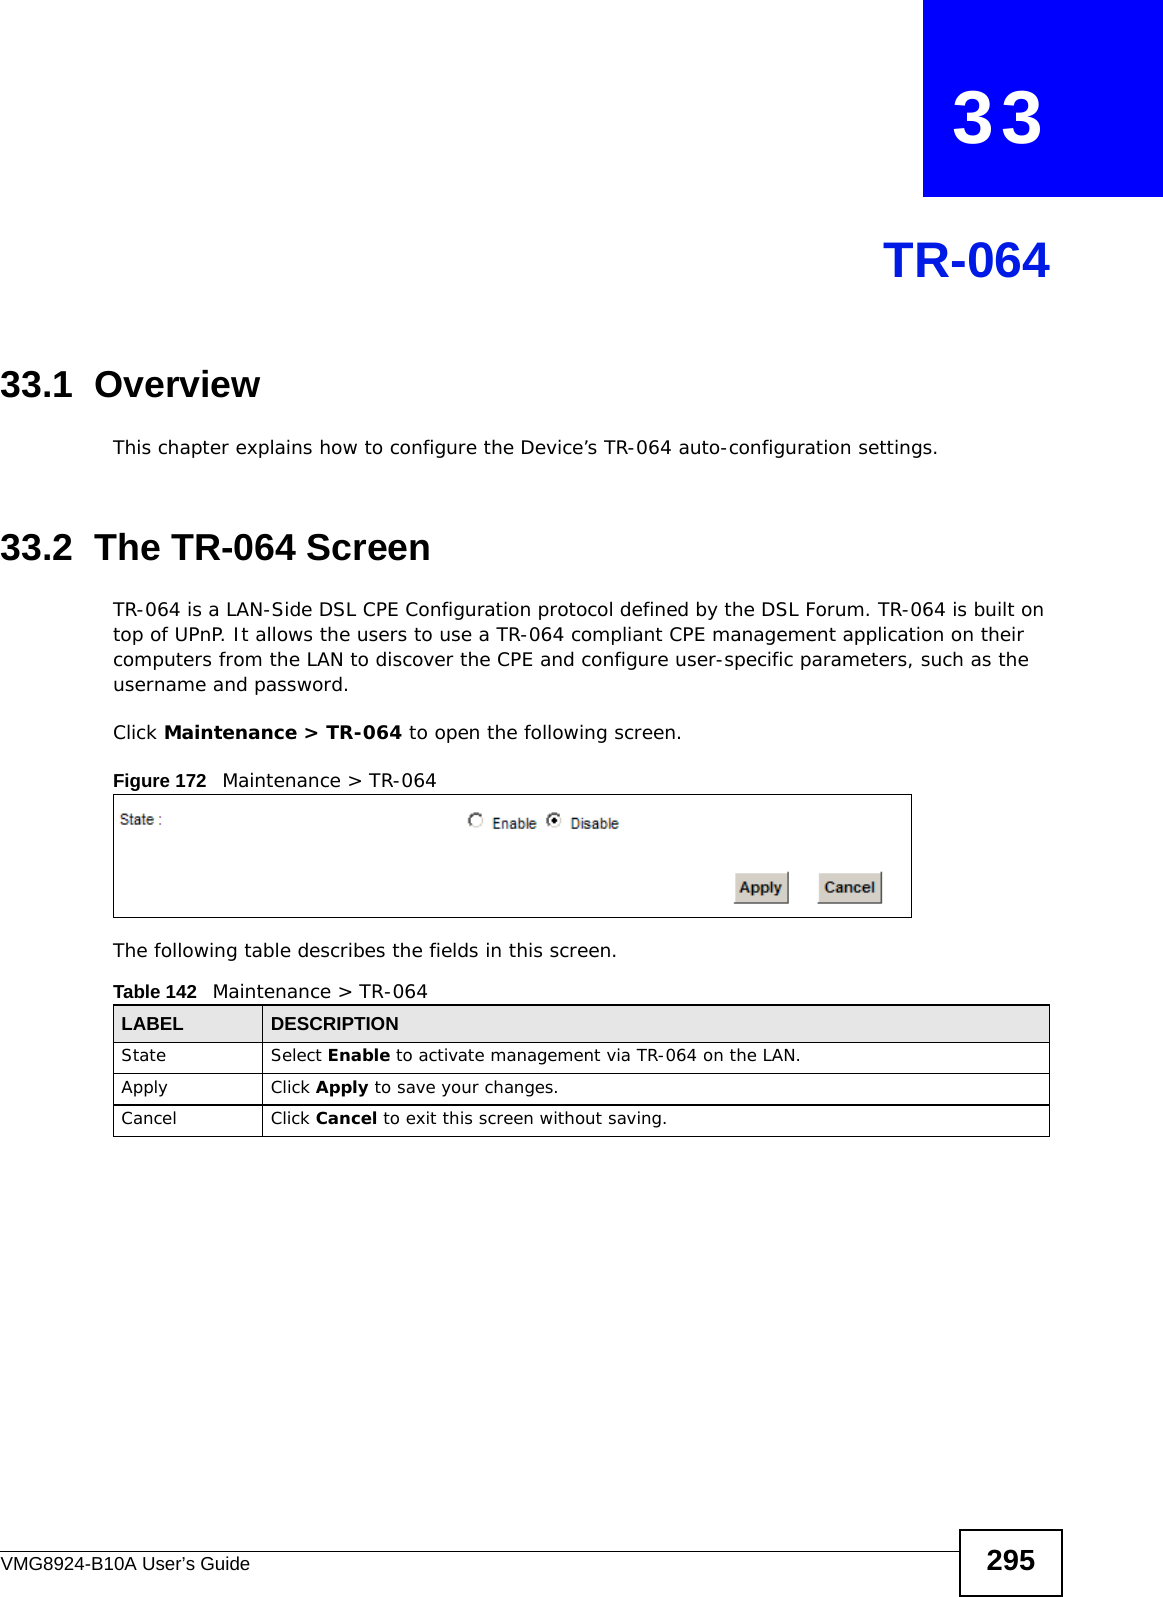 VMG8924-B10A User’s Guide 295CHAPTER   33TR-06433.1  OverviewThis chapter explains how to configure the Device’s TR-064 auto-configuration settings.33.2  The TR-064 ScreenTR-064 is a LAN-Side DSL CPE Configuration protocol defined by the DSL Forum. TR-064 is built on top of UPnP. It allows the users to use a TR-064 compliant CPE management application on their computers from the LAN to discover the CPE and configure user-specific parameters, such as the username and password.Click Maintenance &gt; TR-064 to open the following screen. Figure 172   Maintenance &gt; TR-064 The following table describes the fields in this screen. Table 142   Maintenance &gt; TR-064LABEL DESCRIPTIONState Select Enable to activate management via TR-064 on the LAN.Apply Click Apply to save your changes.Cancel Click Cancel to exit this screen without saving.